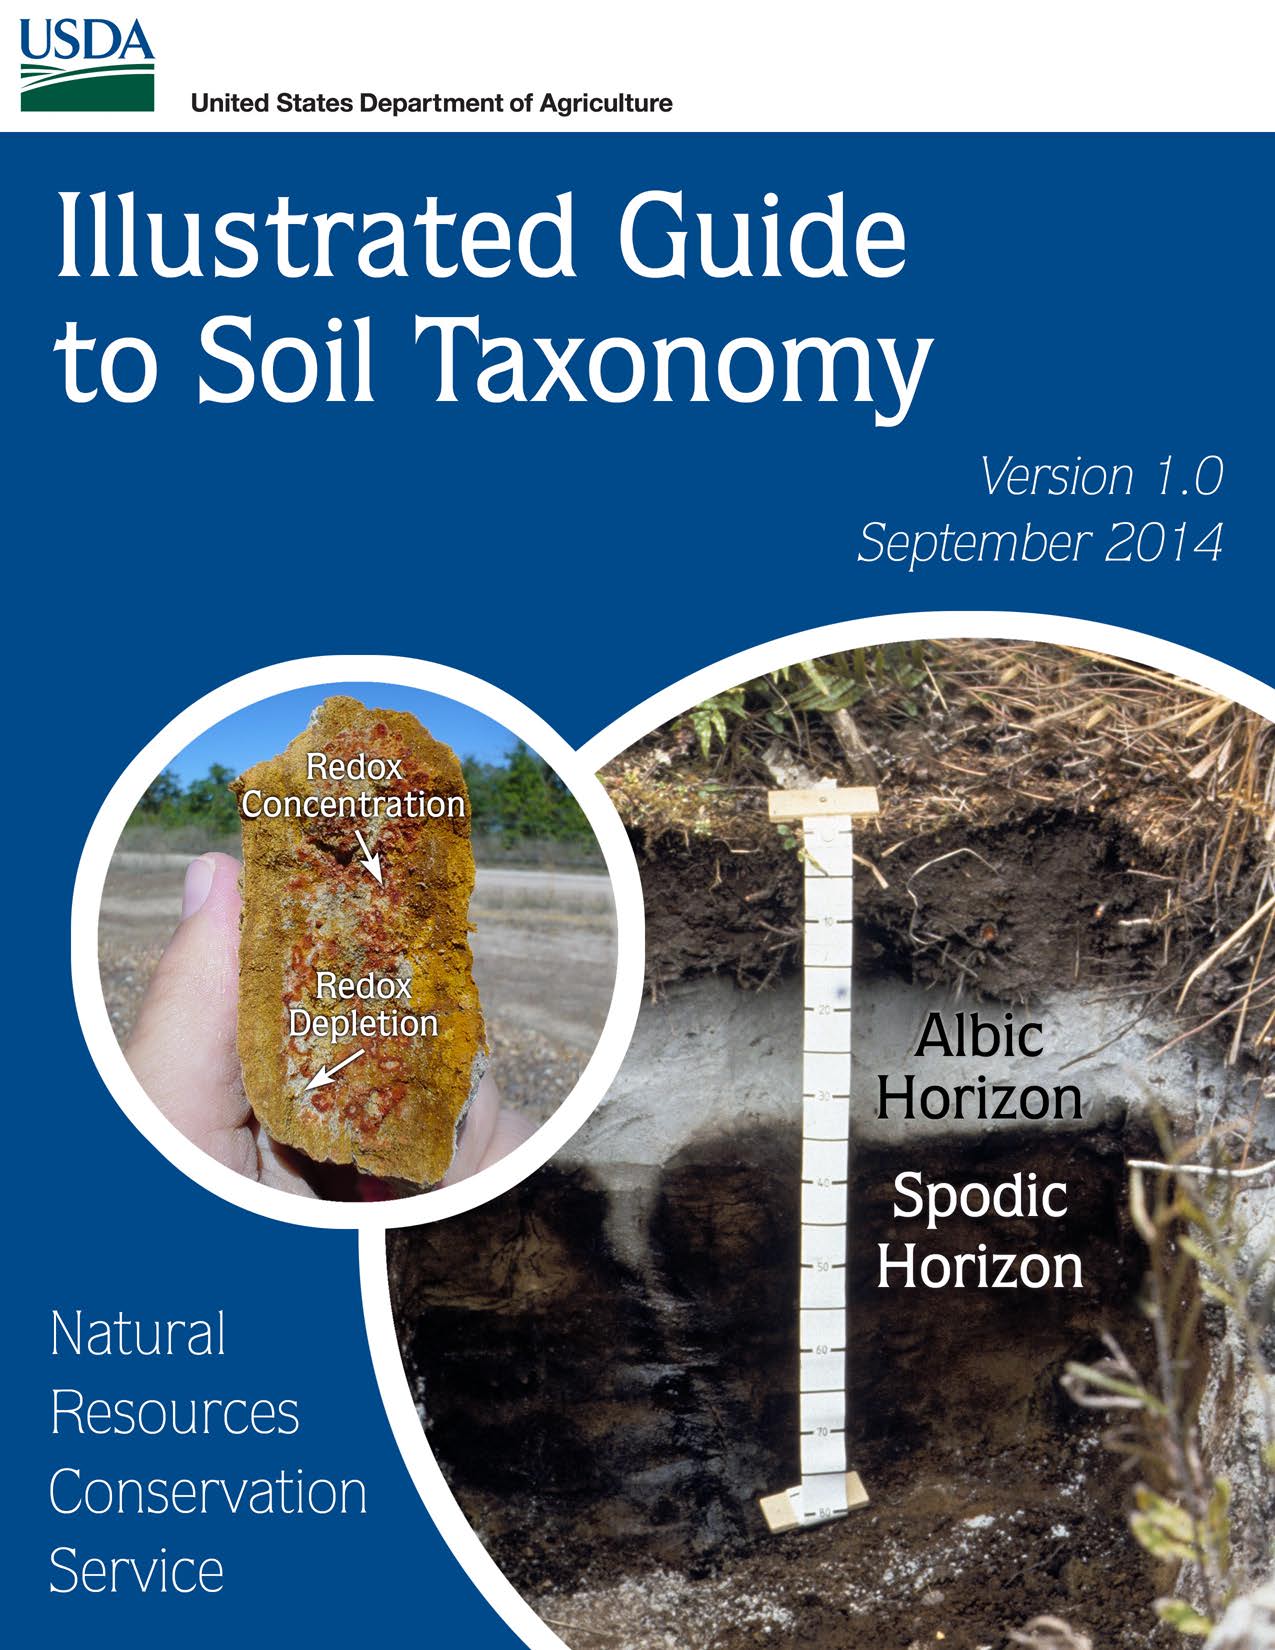 Soil-Illustrated Guide to Soil Taxonomy, version 1.0